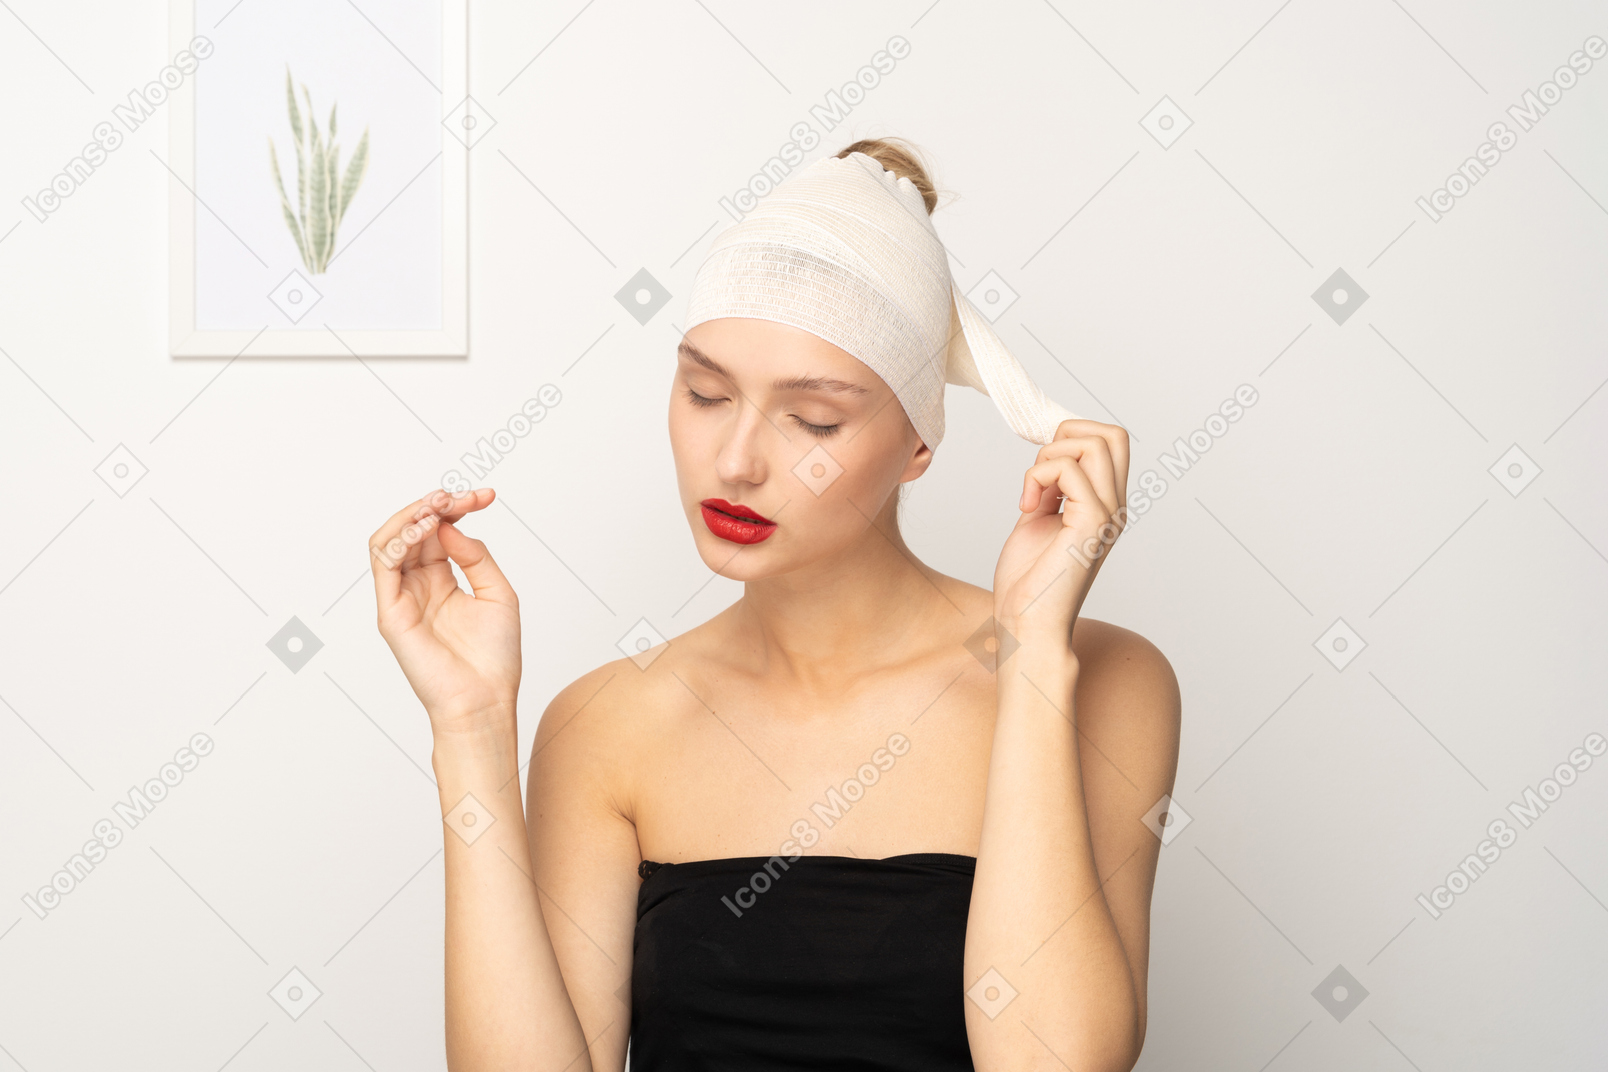 Young woman removing her head bandage